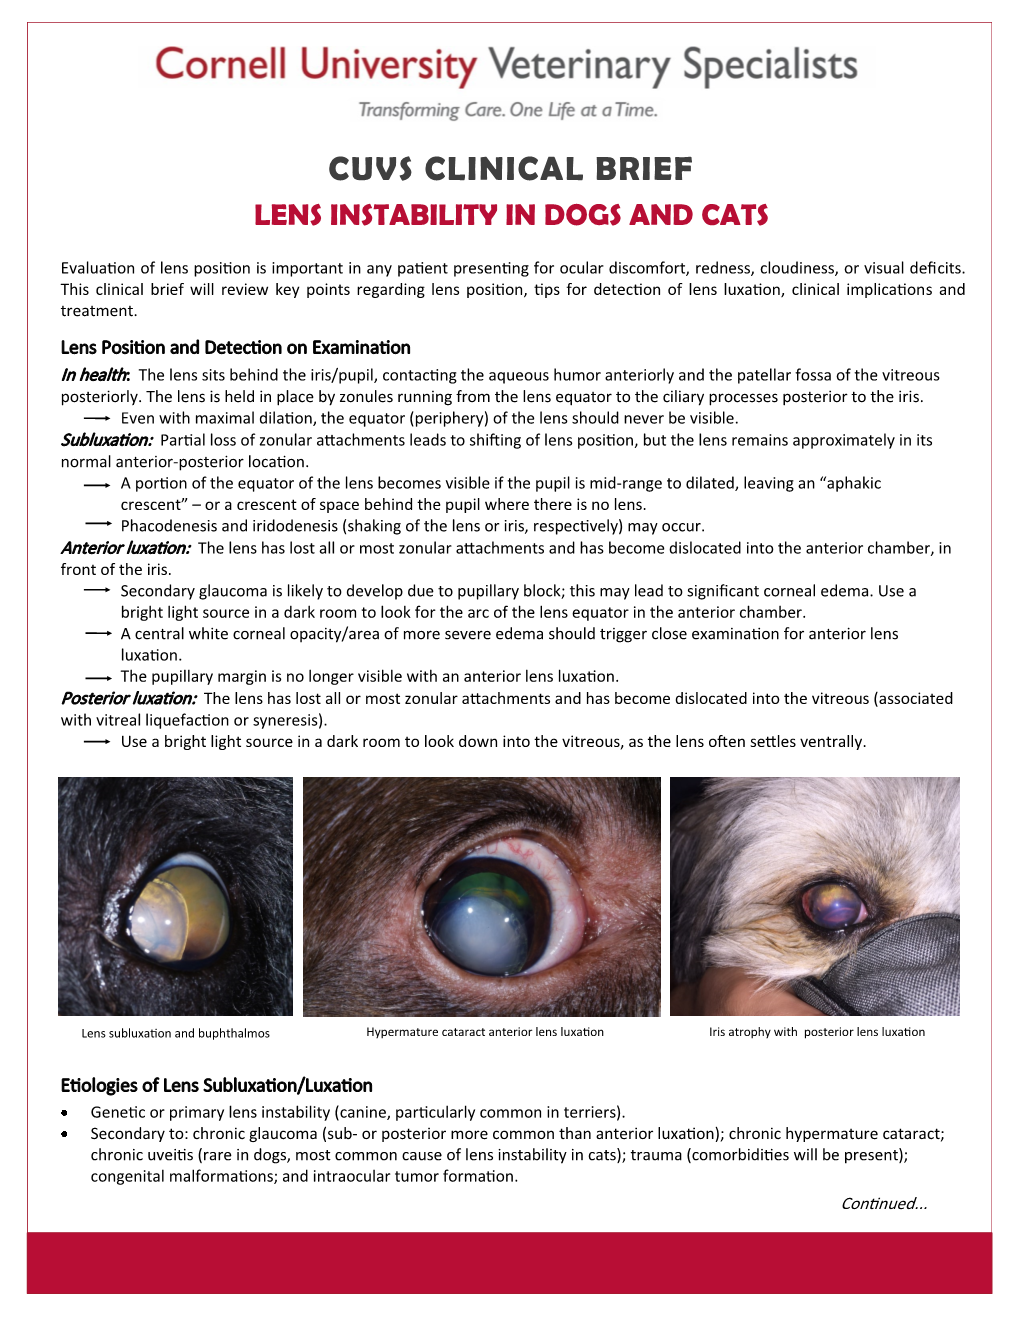 Cuvs Clinical Brief Lens Instability in Dogs and Cats